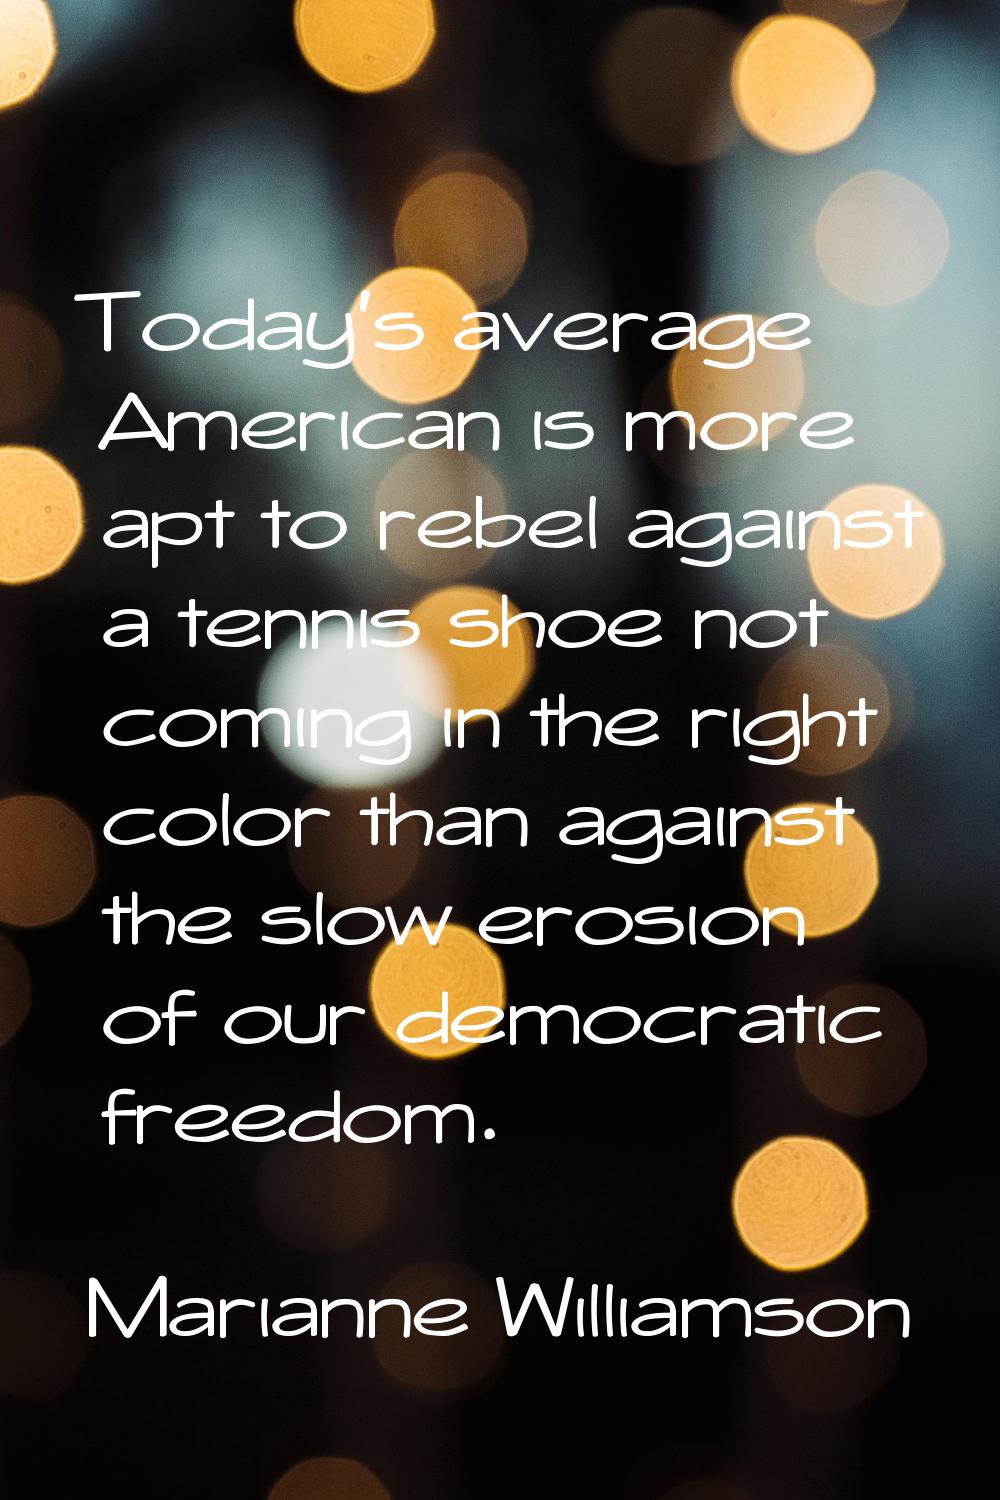 Today's average American is more apt to rebel against a tennis shoe not coming in the right color t